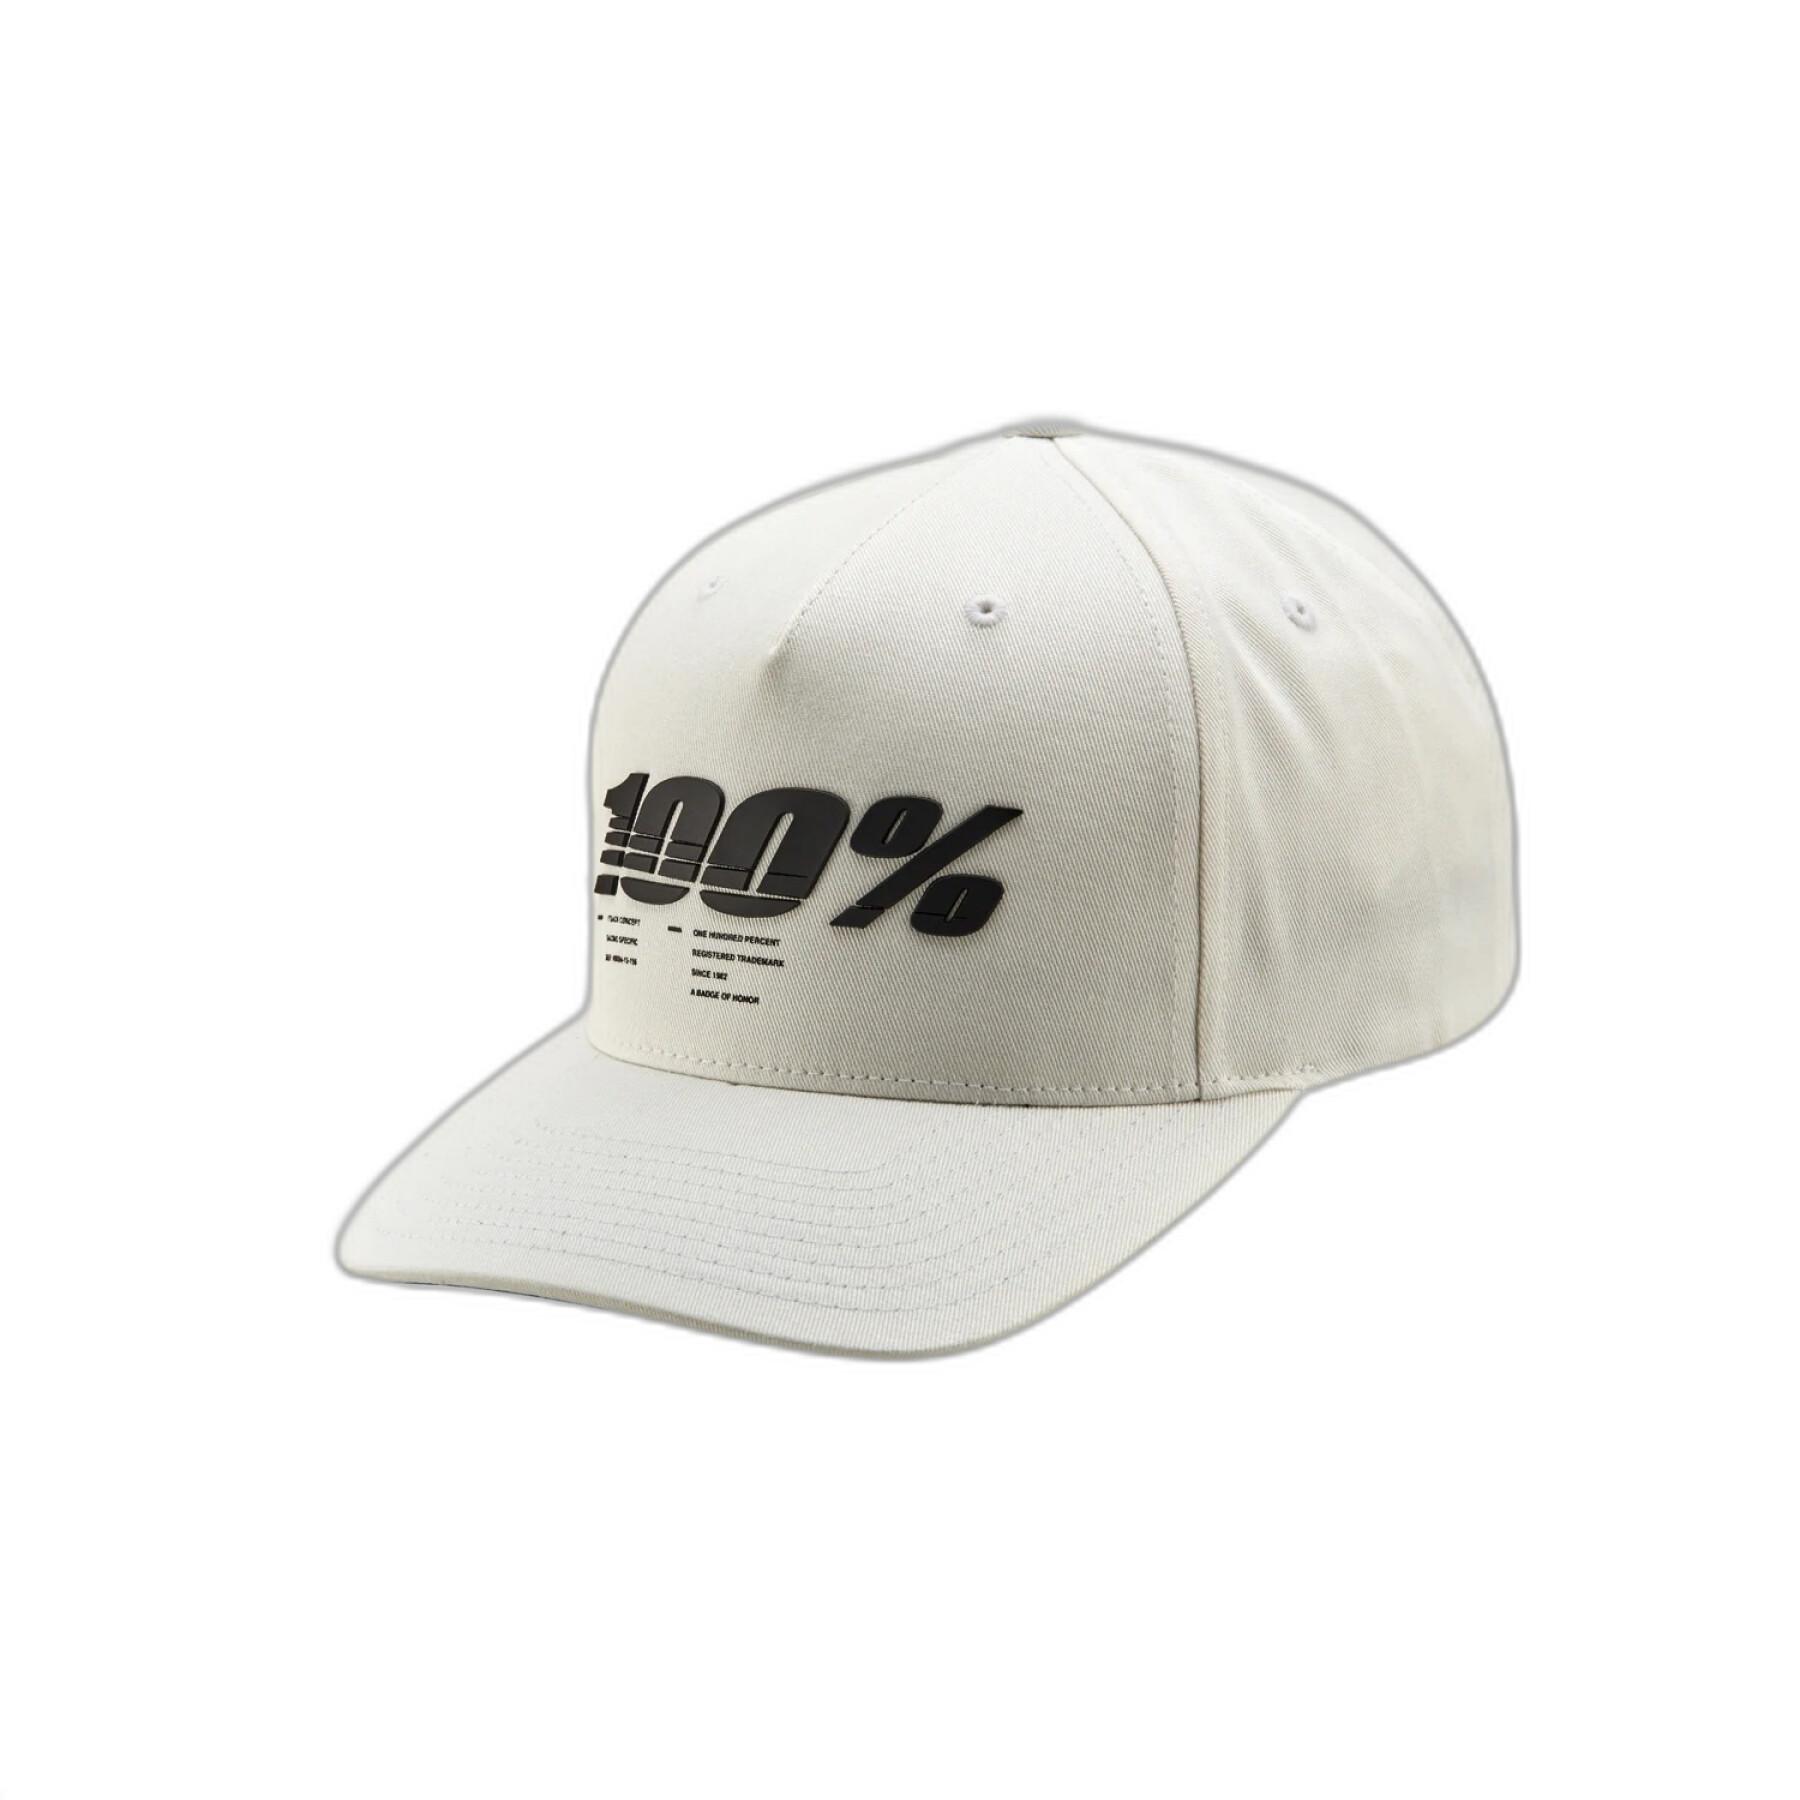 Cap 100% staunch snapback x-fit